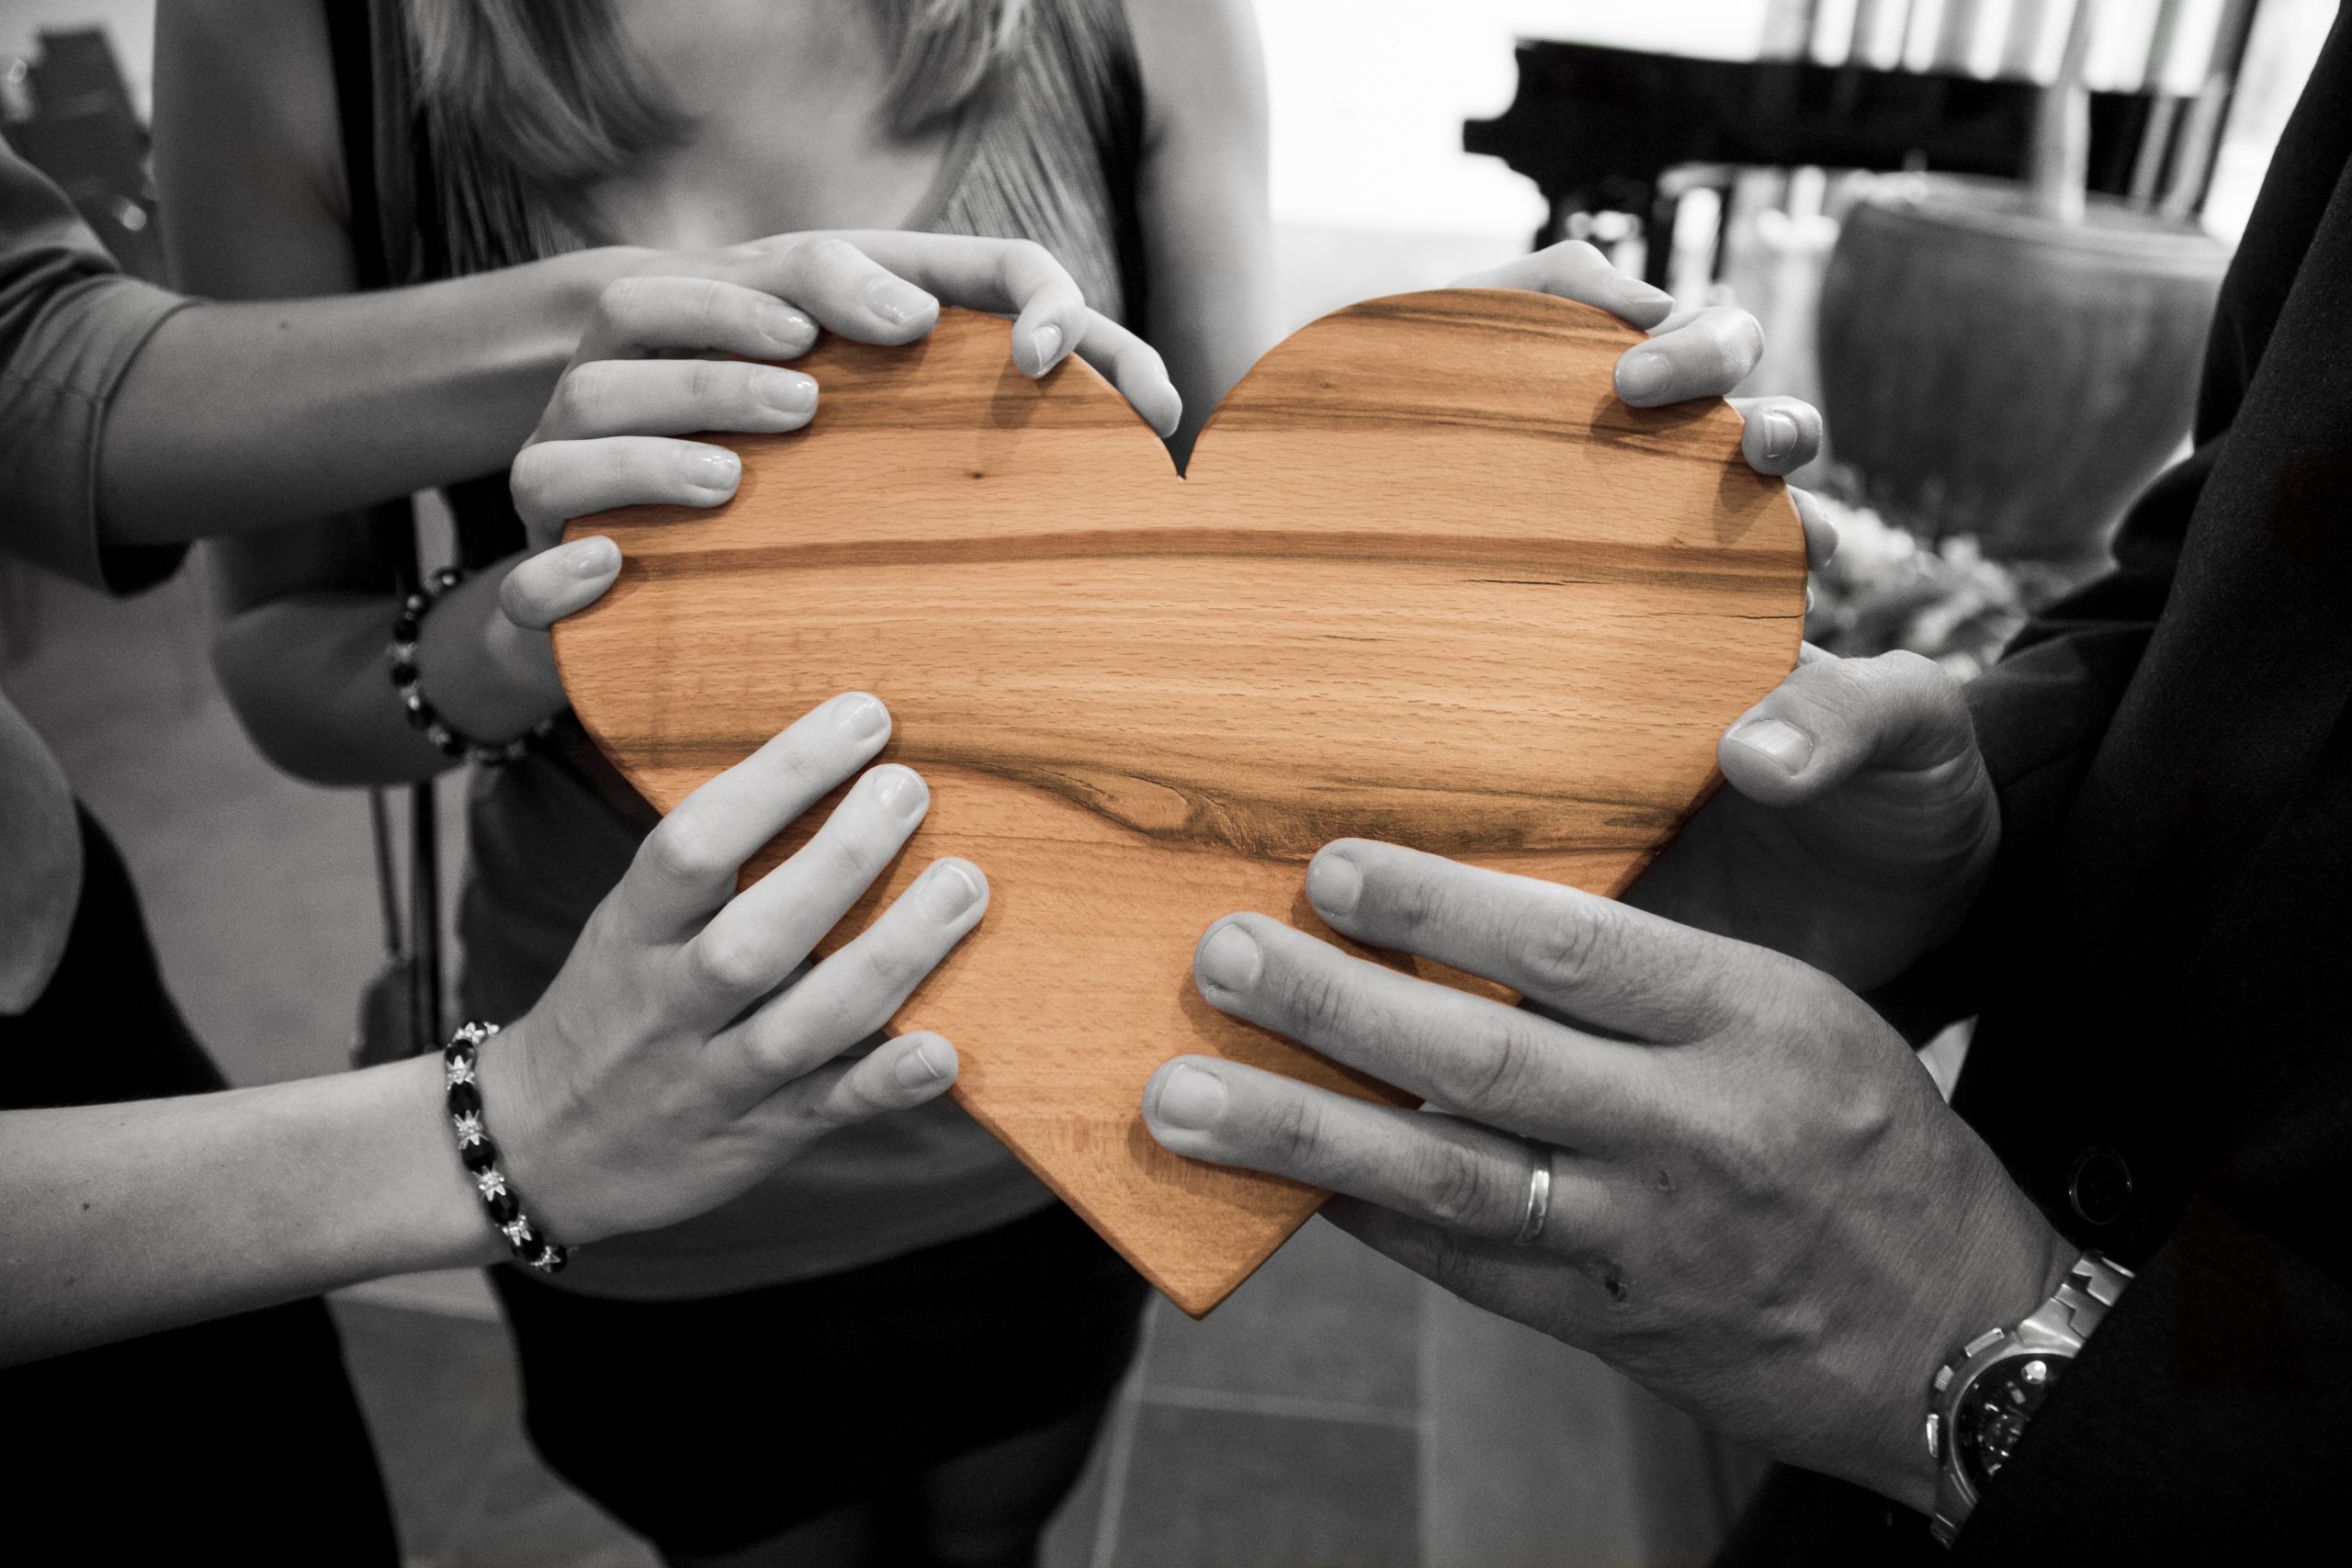 A History Of Helping Hands: 5 Surprising Facts About Social Work